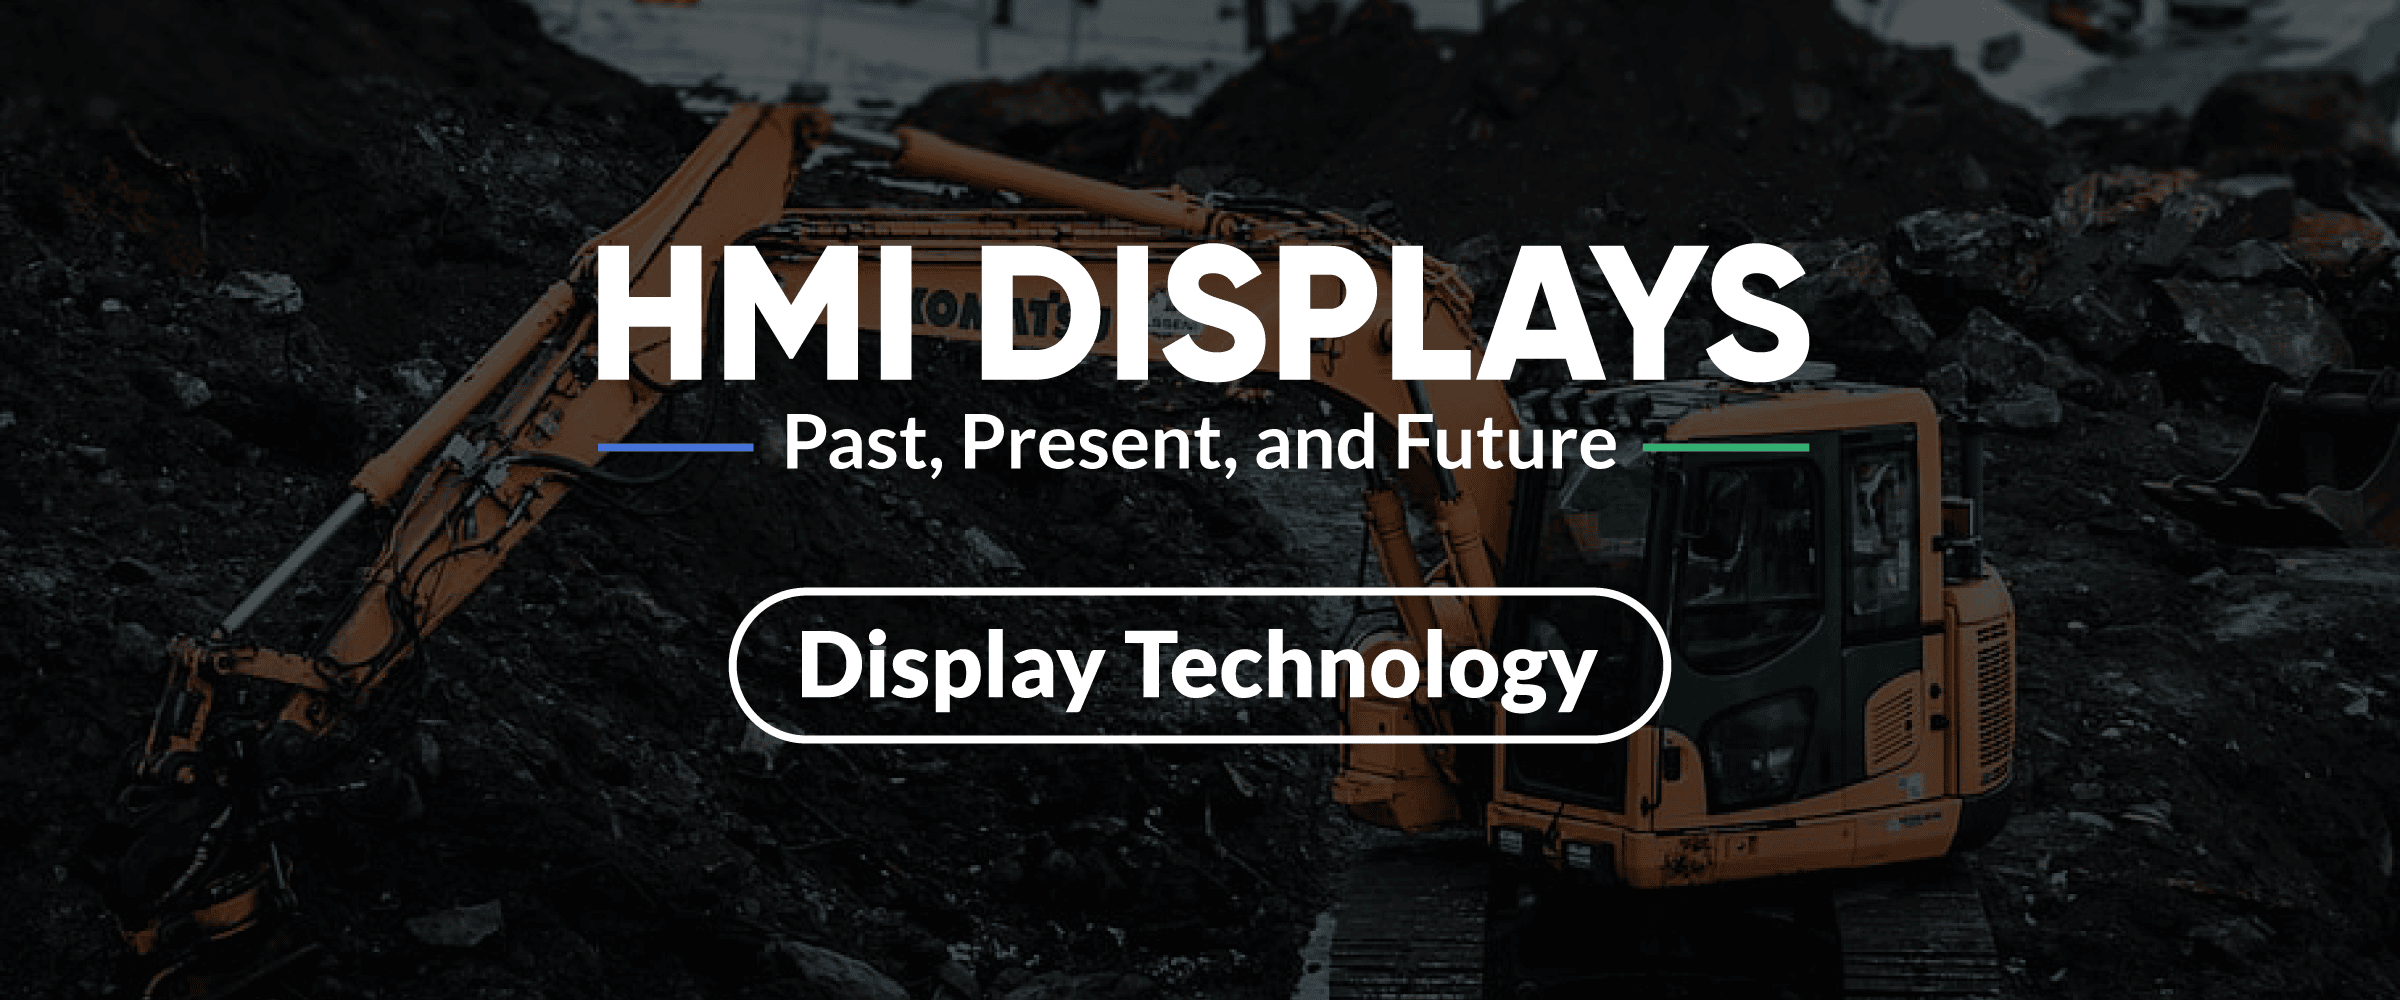 HMI Display technology deep dive hero image with construction machine in background